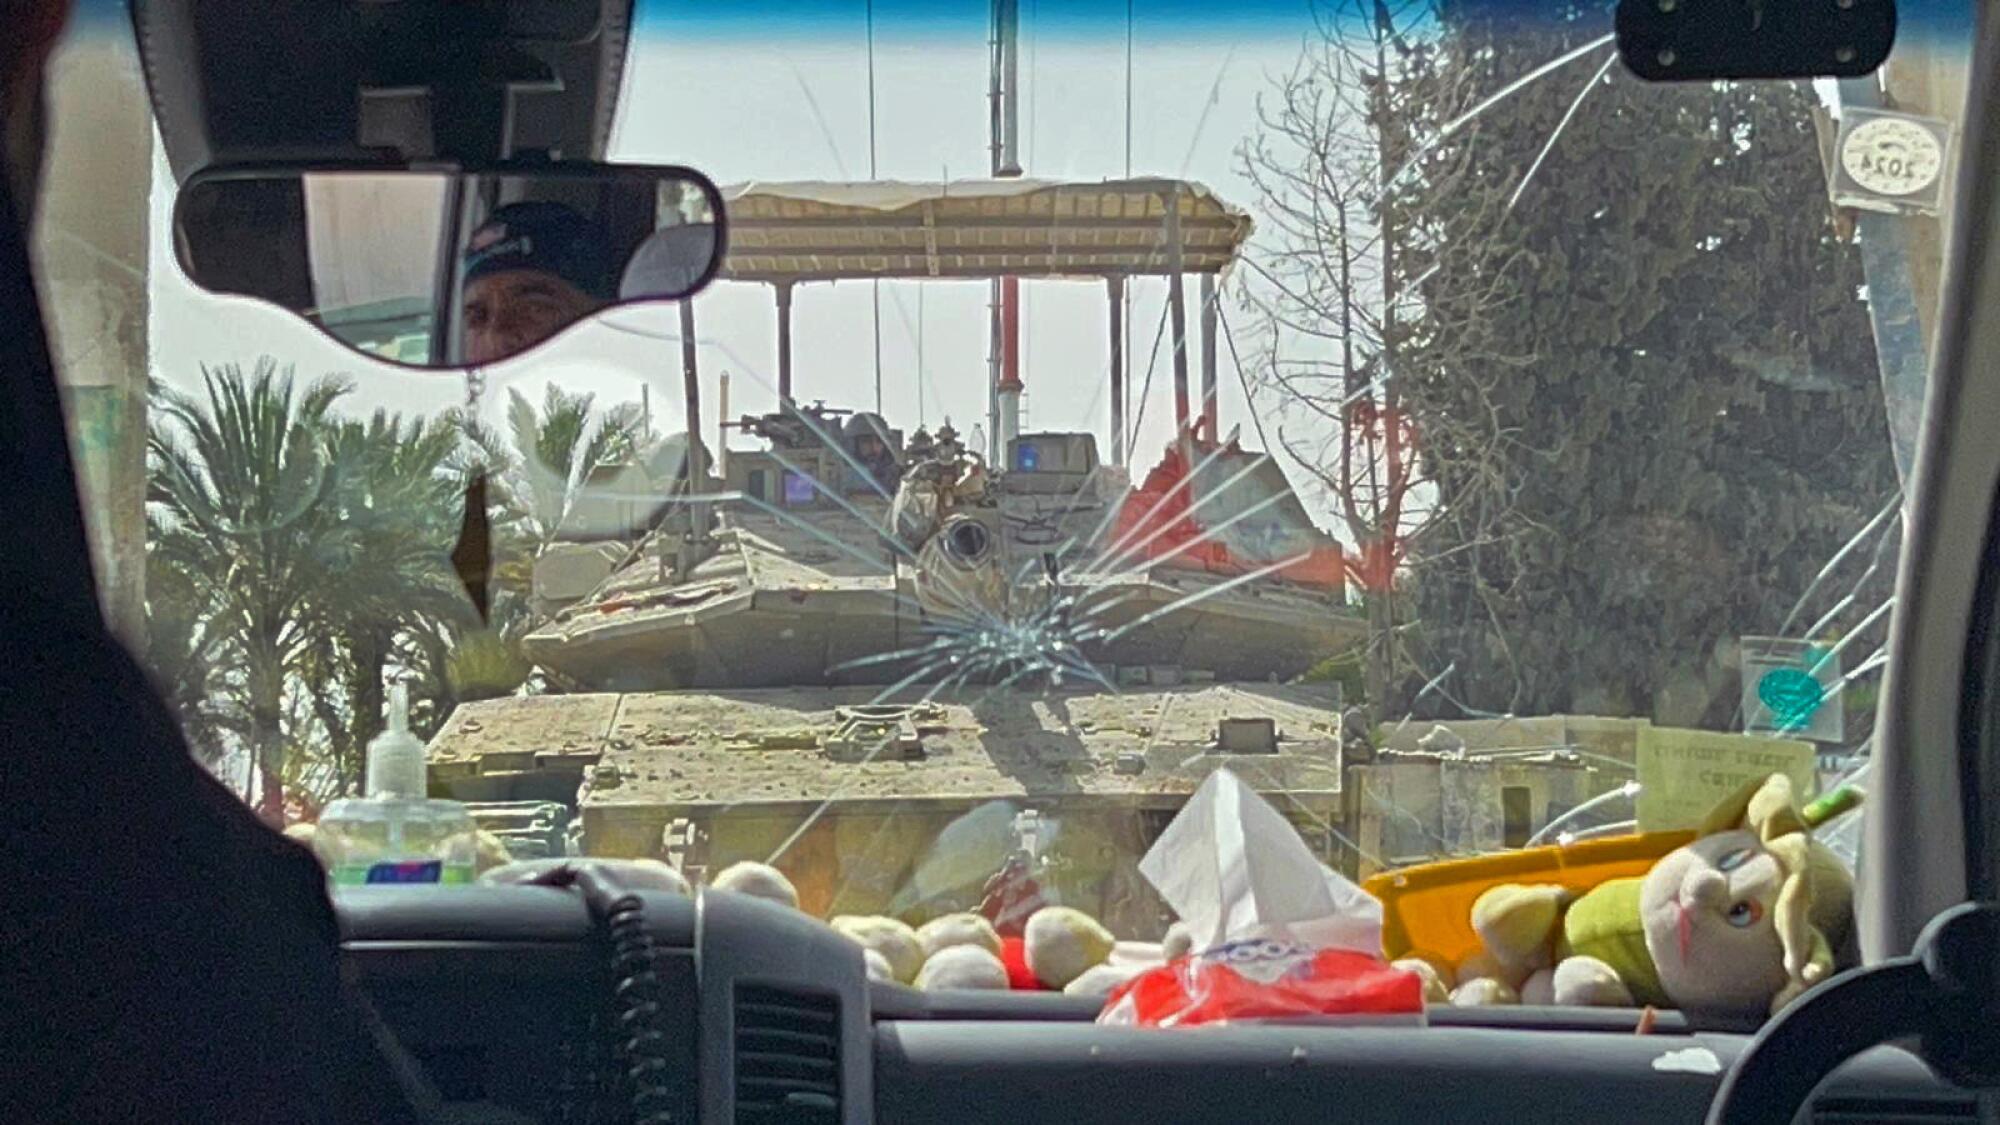 A tank is seen through the cracked window of a passenger vehicle.